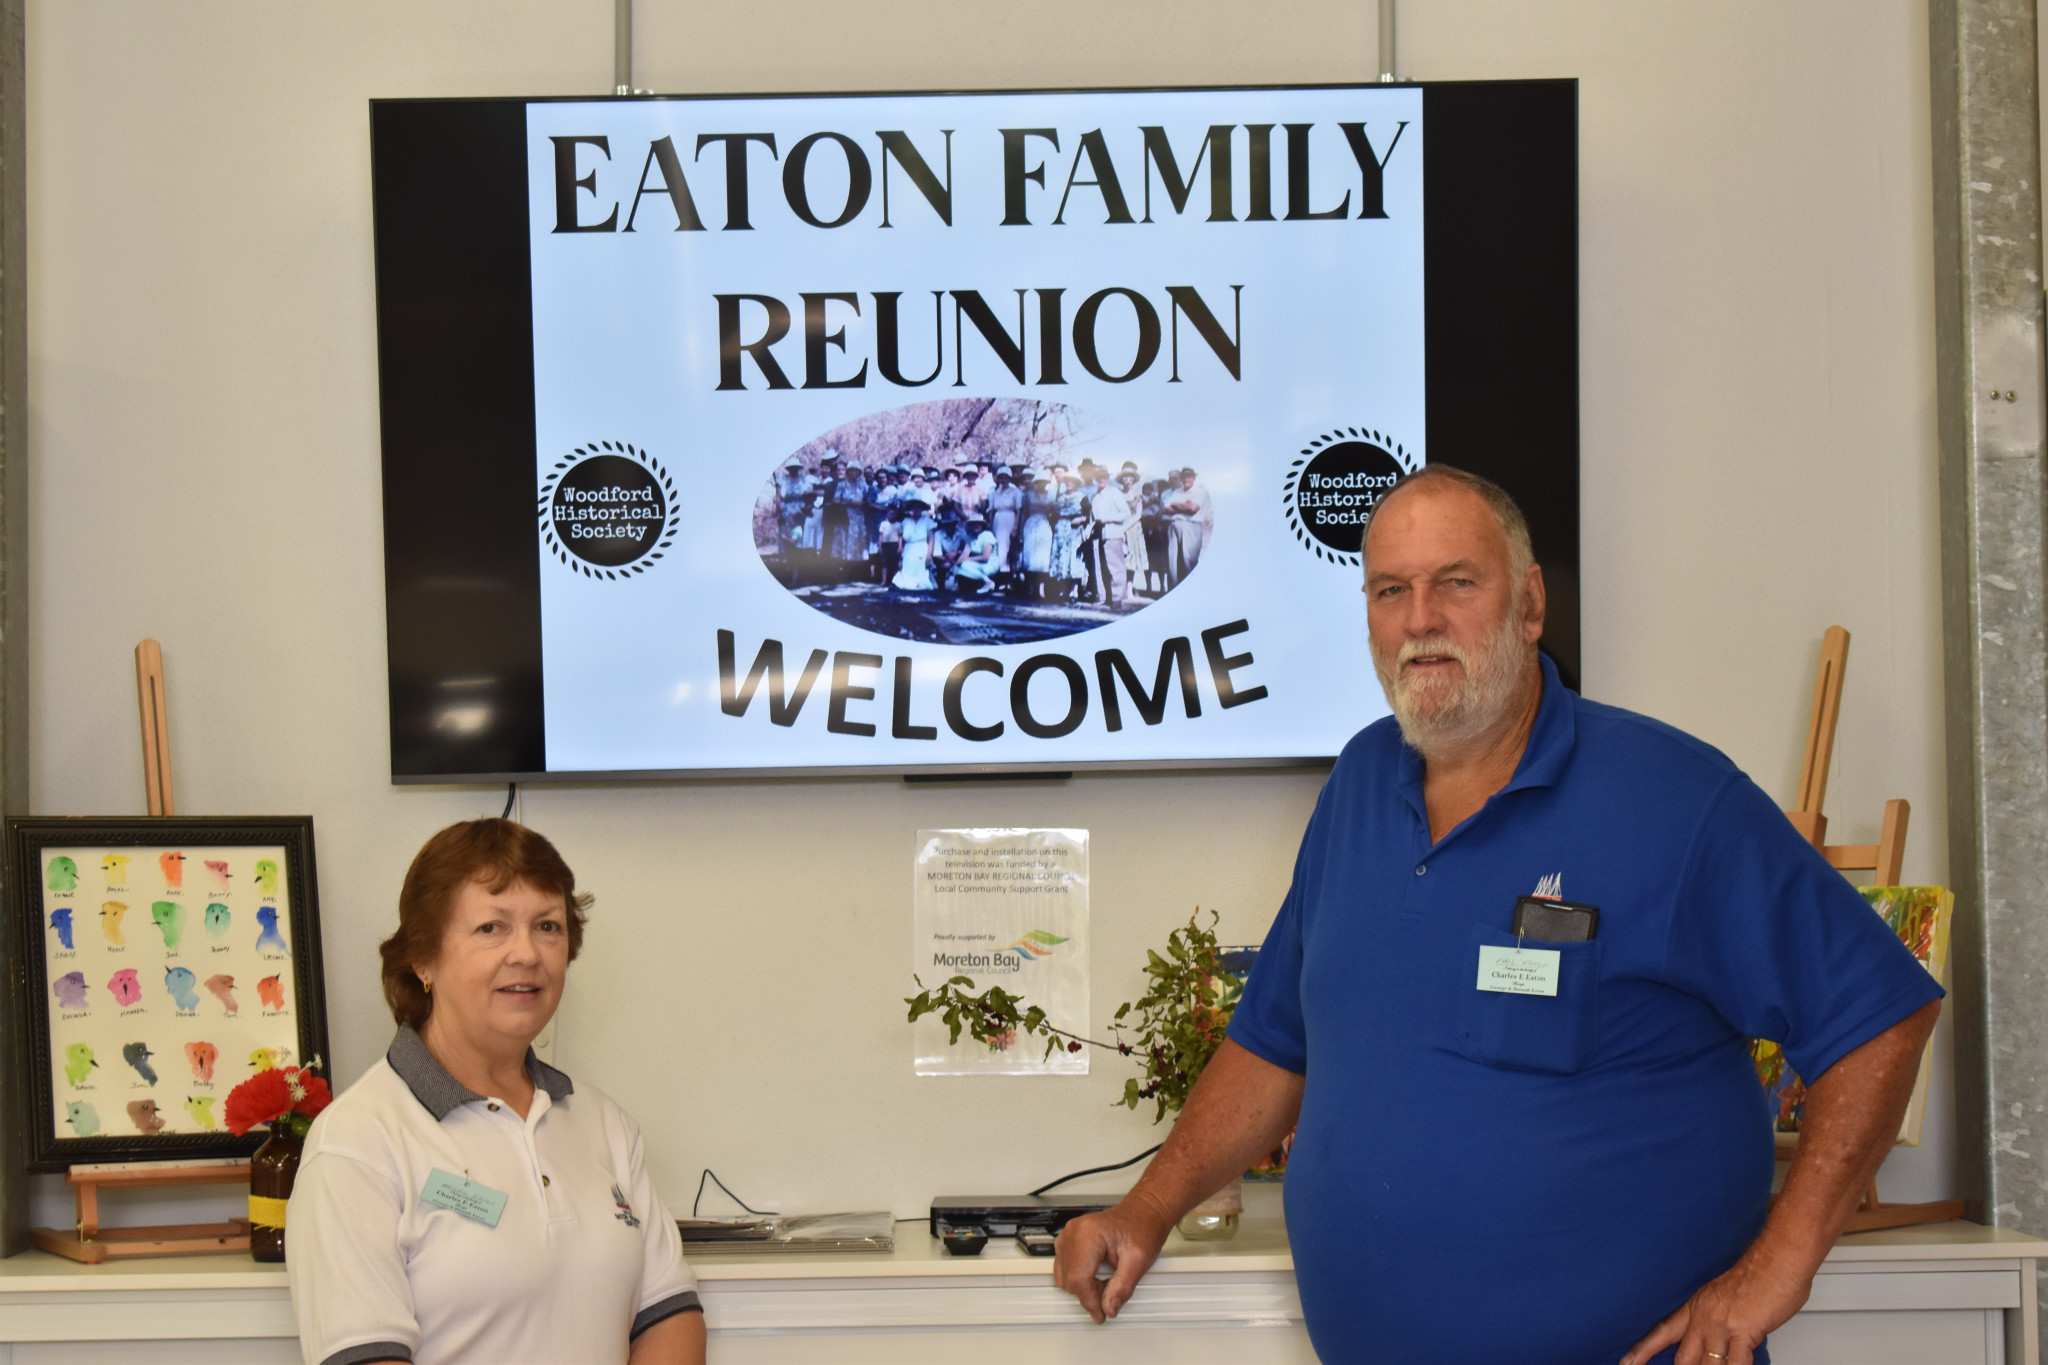 Helen and Phil Eaton at the Eaton family reunion.